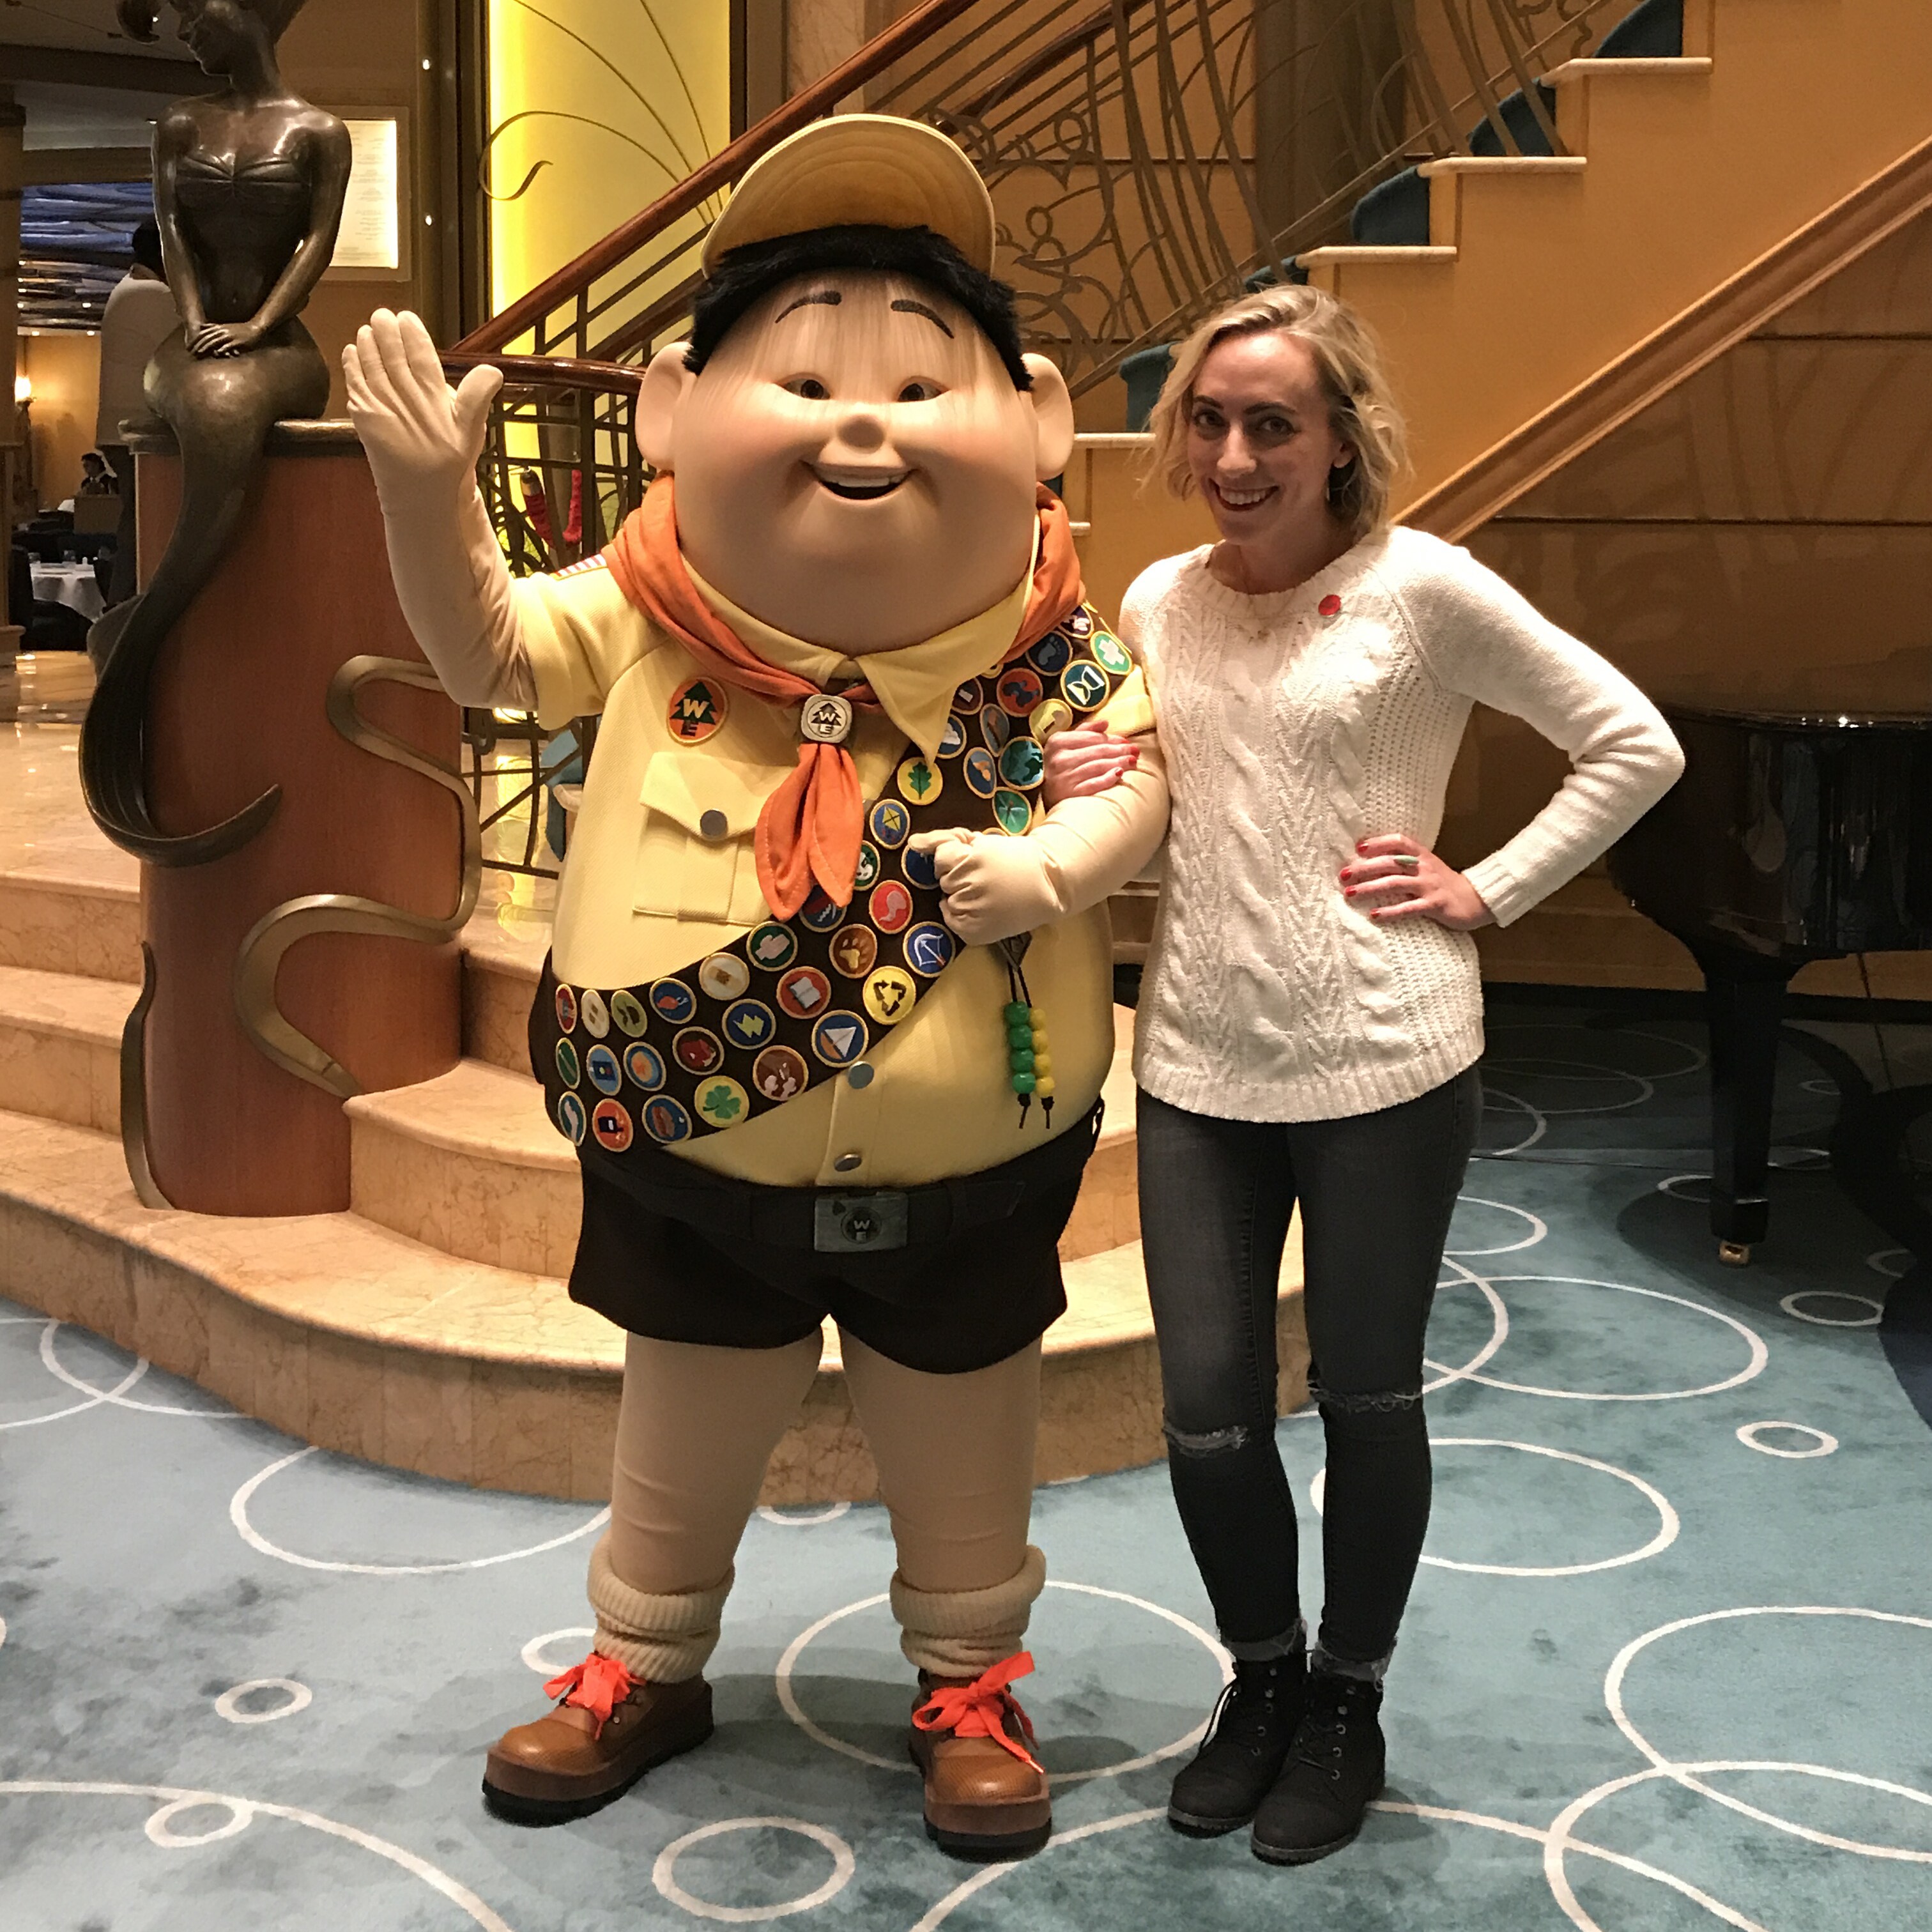 Russell from UP and Oh My Disney Host Michelle Lema on the Disney Wonder